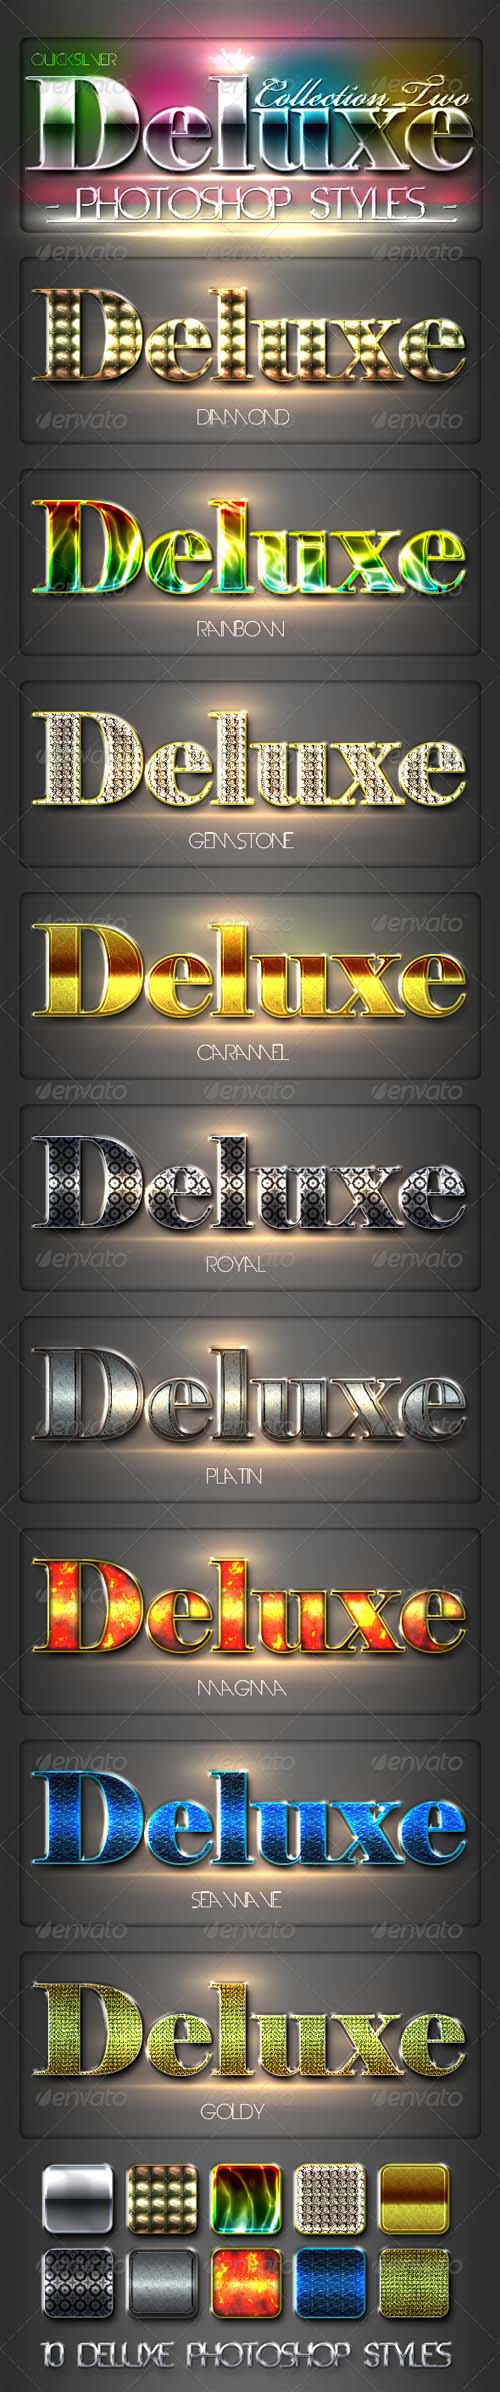 GraphicRiver - 10 DeLuxe Photoshop Layer Styles Collection 2